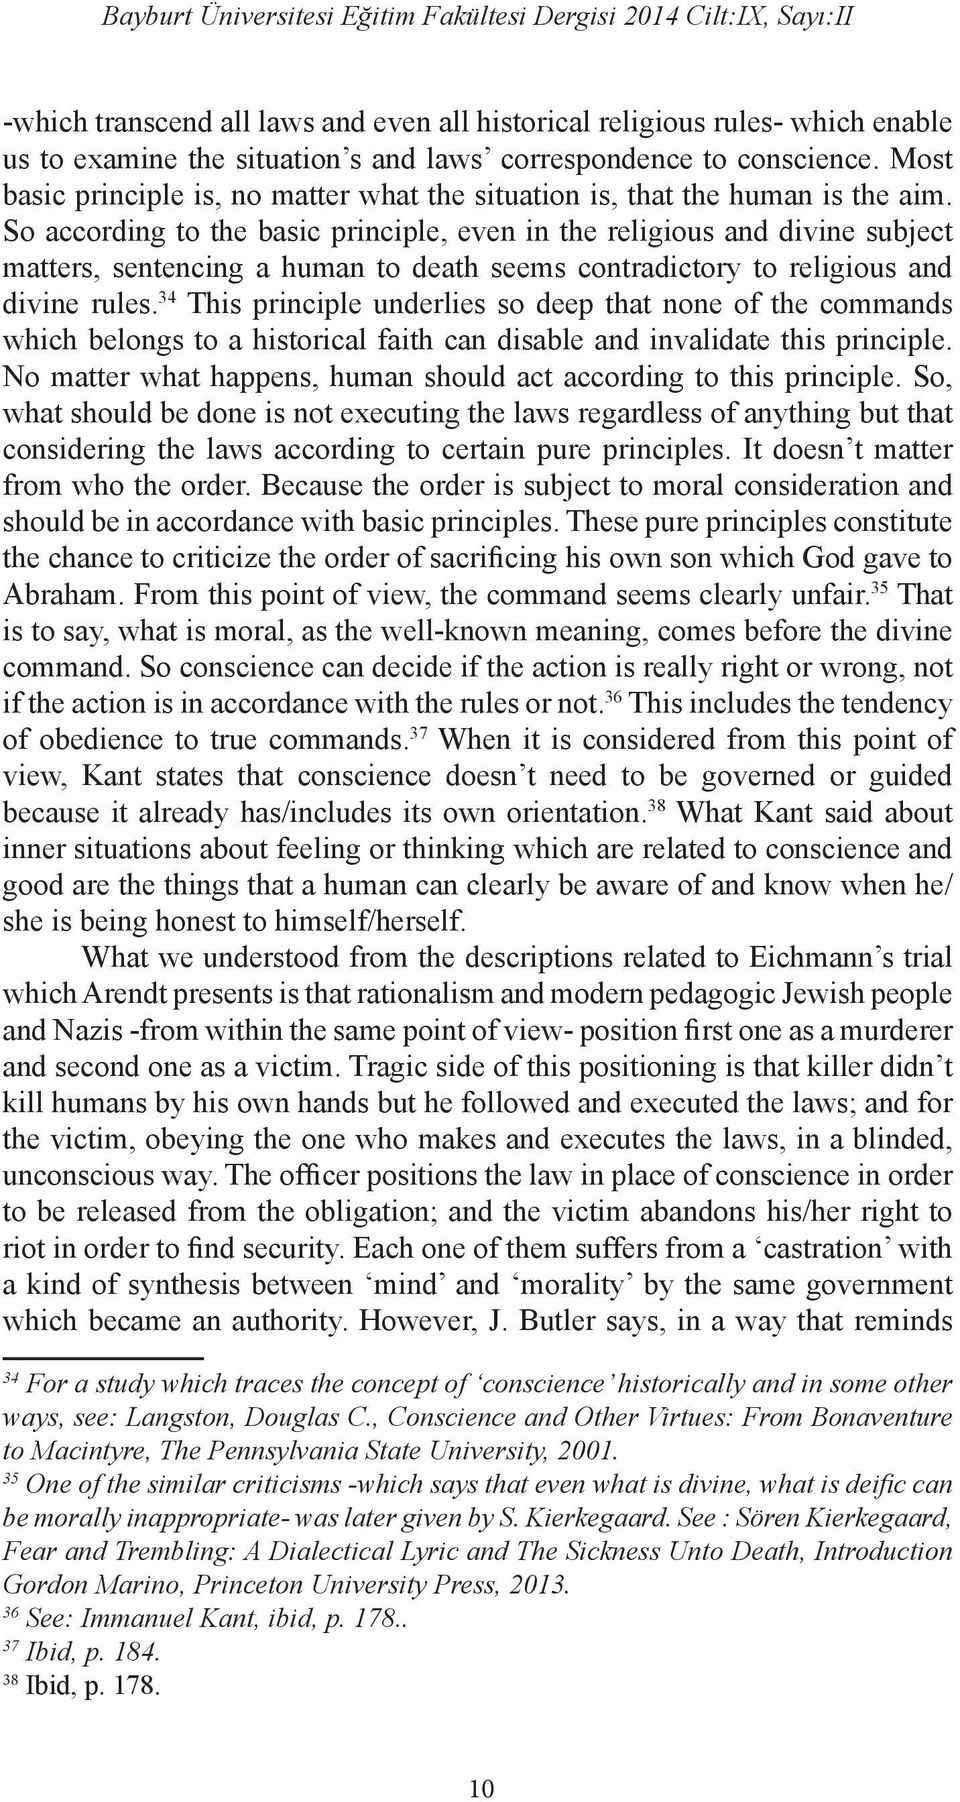 So according to the basic principle, even in the religious and divine subject matters, sentencing a human to death seems contradictory to religious and divine rules.